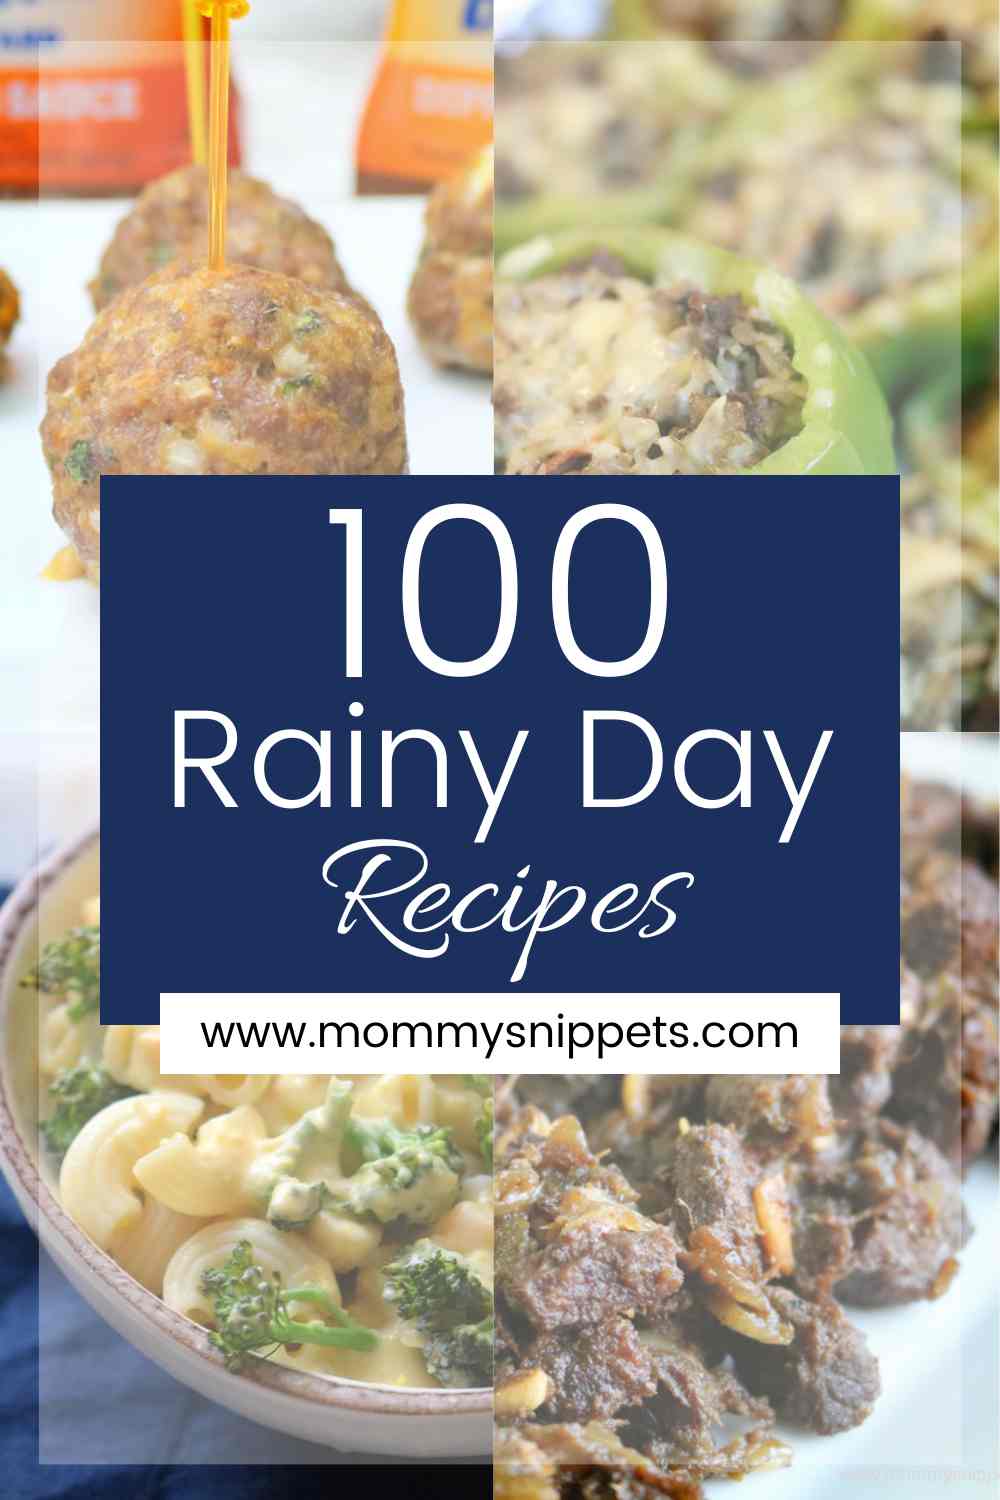 What's more comforting than hot soup on a rainy day? Here are 100 rainy day recipes, including rainy day soup recipes, recipes for dinner, and dessert recipes!